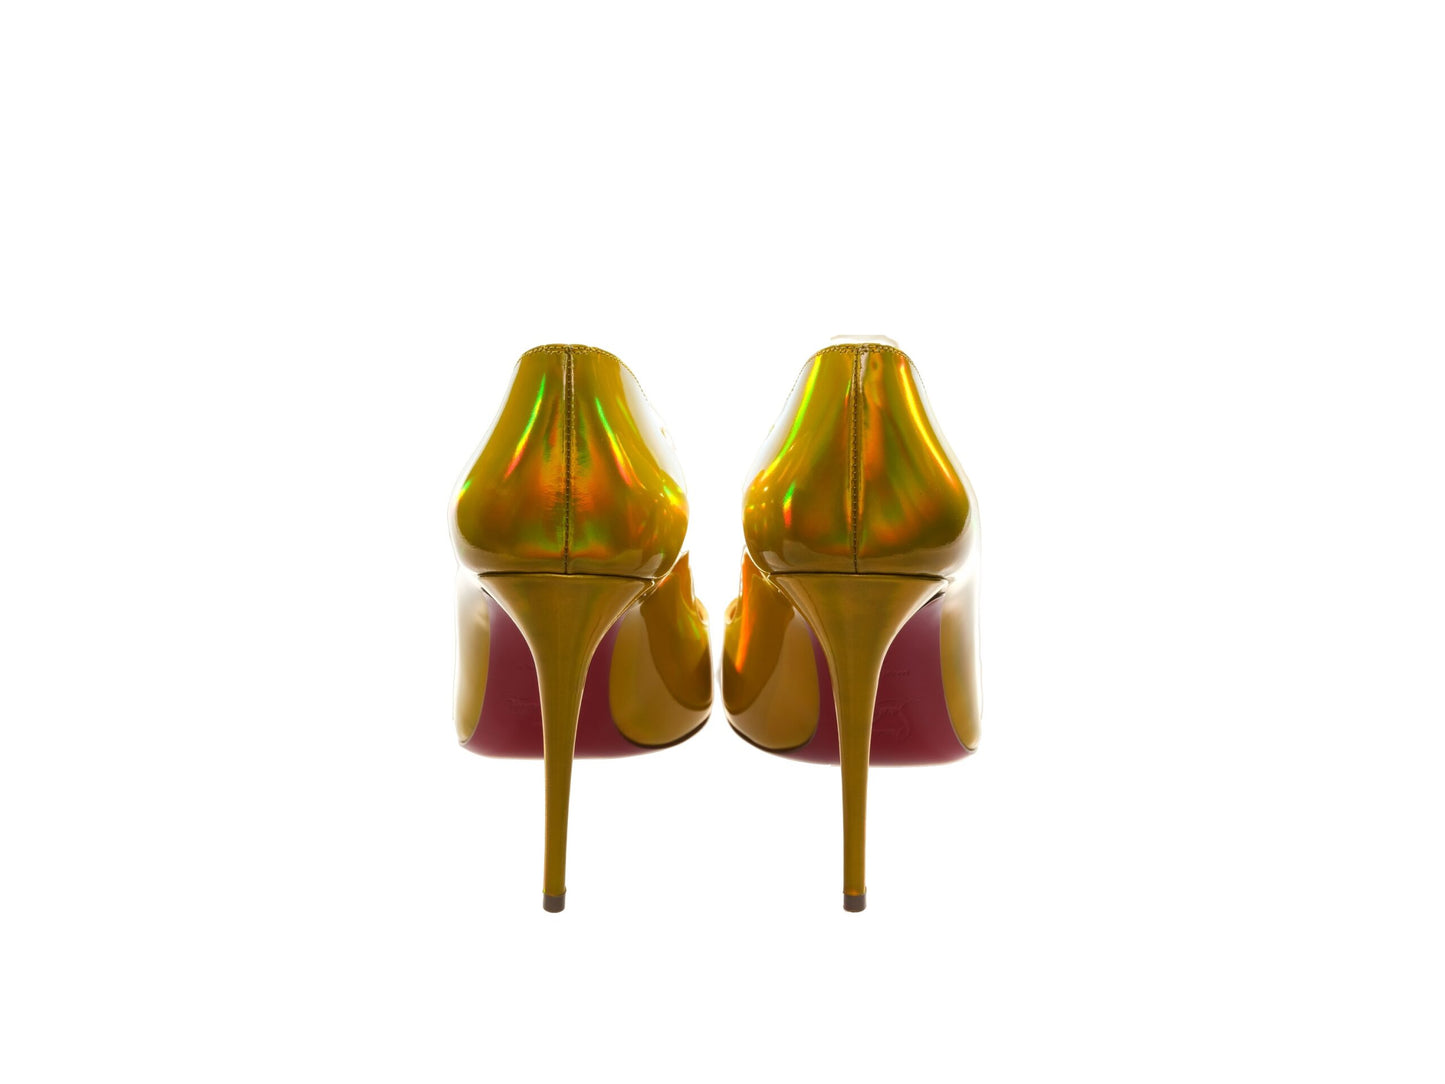 Christian Louboutin Hot Chick 100 Yellow Mirrored Patent Leather High Heel Pumps